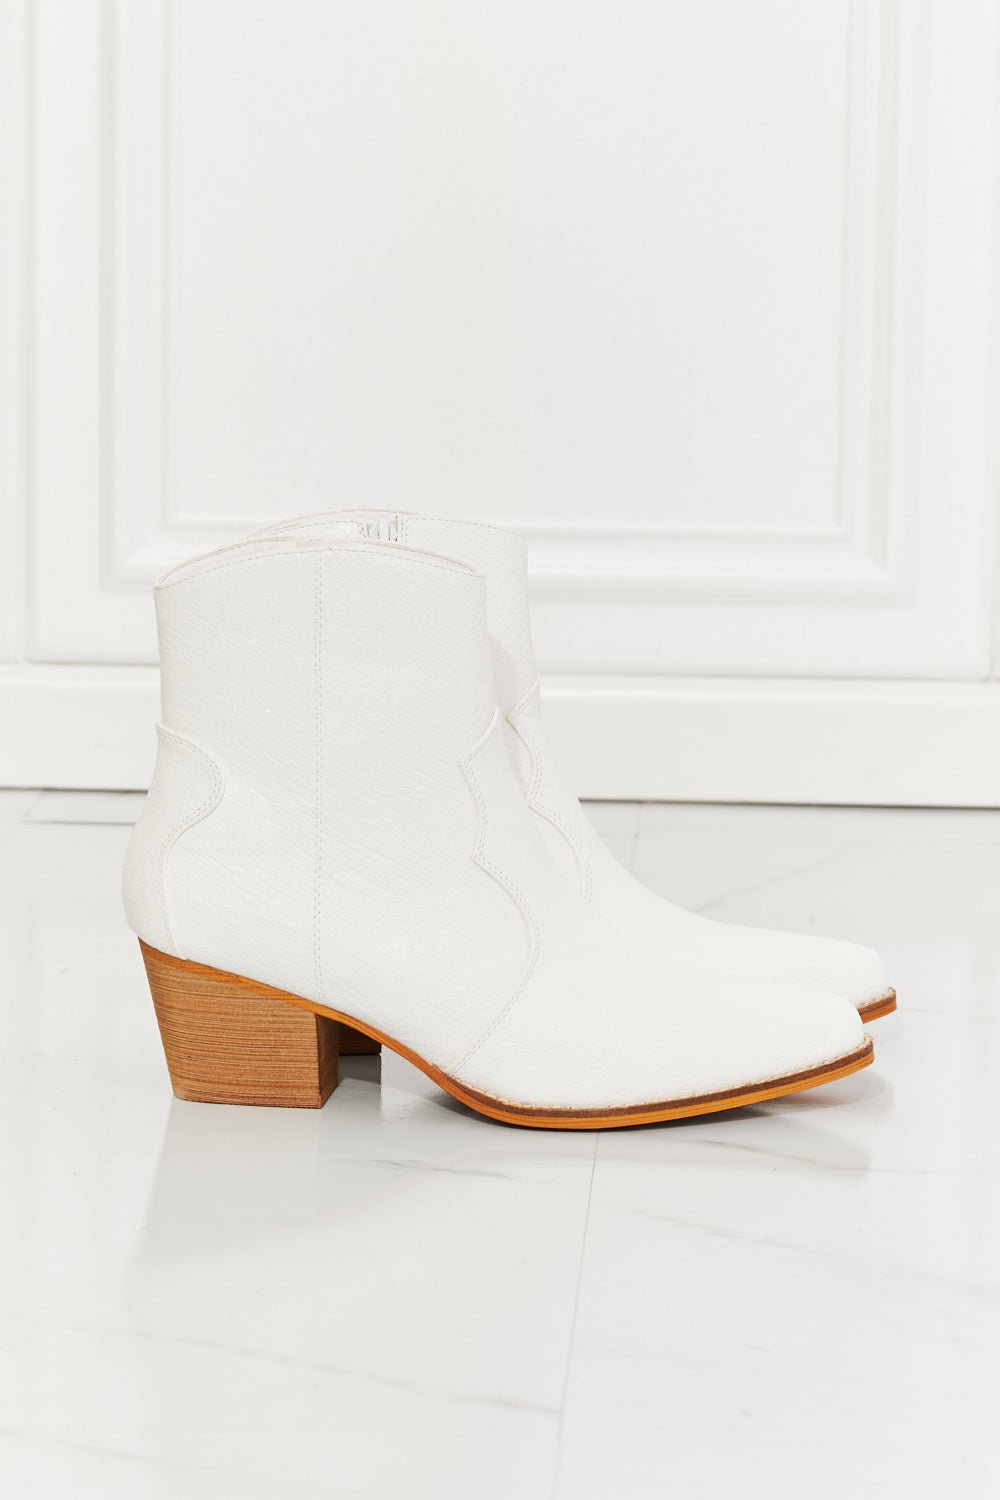 MMShoes Watertower Town Faux Leather Western Ankle Boots in White - Guy Christopher